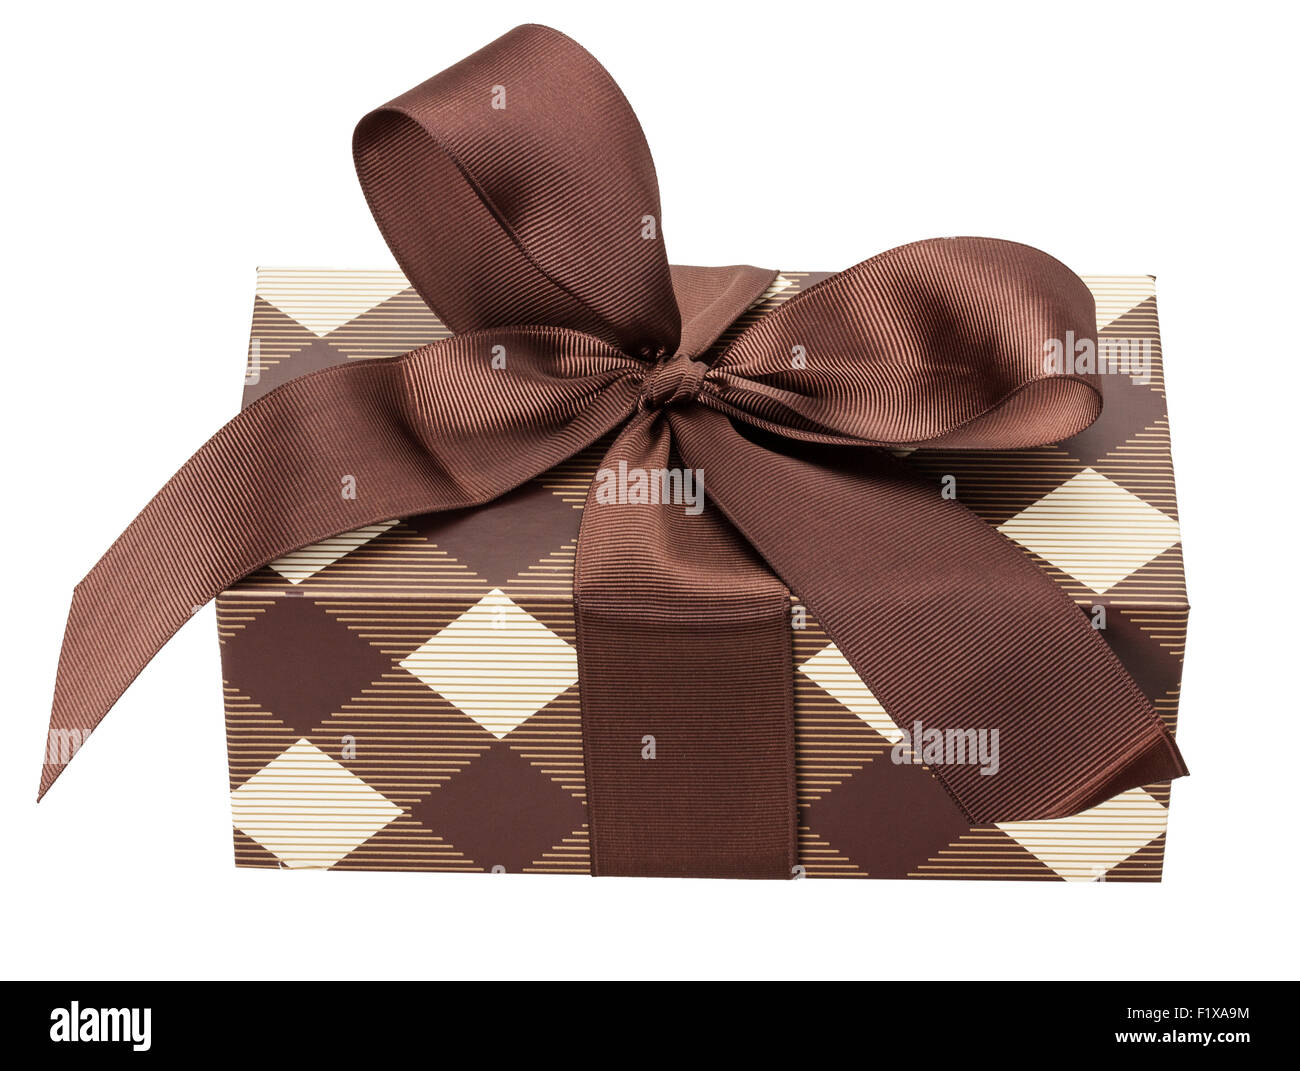 brown gift box isolated on the white background. Stock Photo